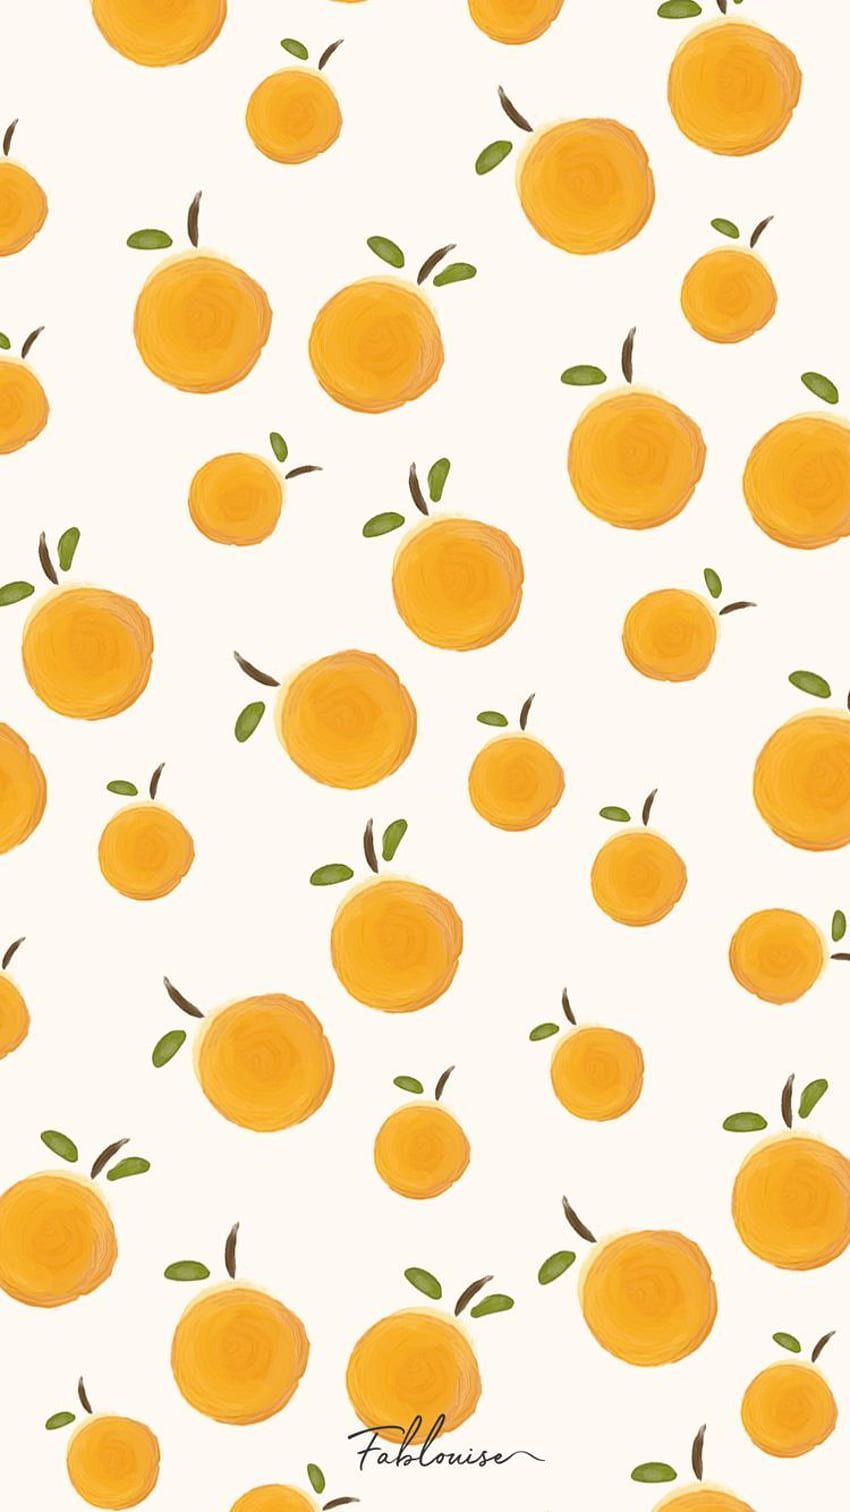 A wallpaper of oranges that looks hand painted - Fruit